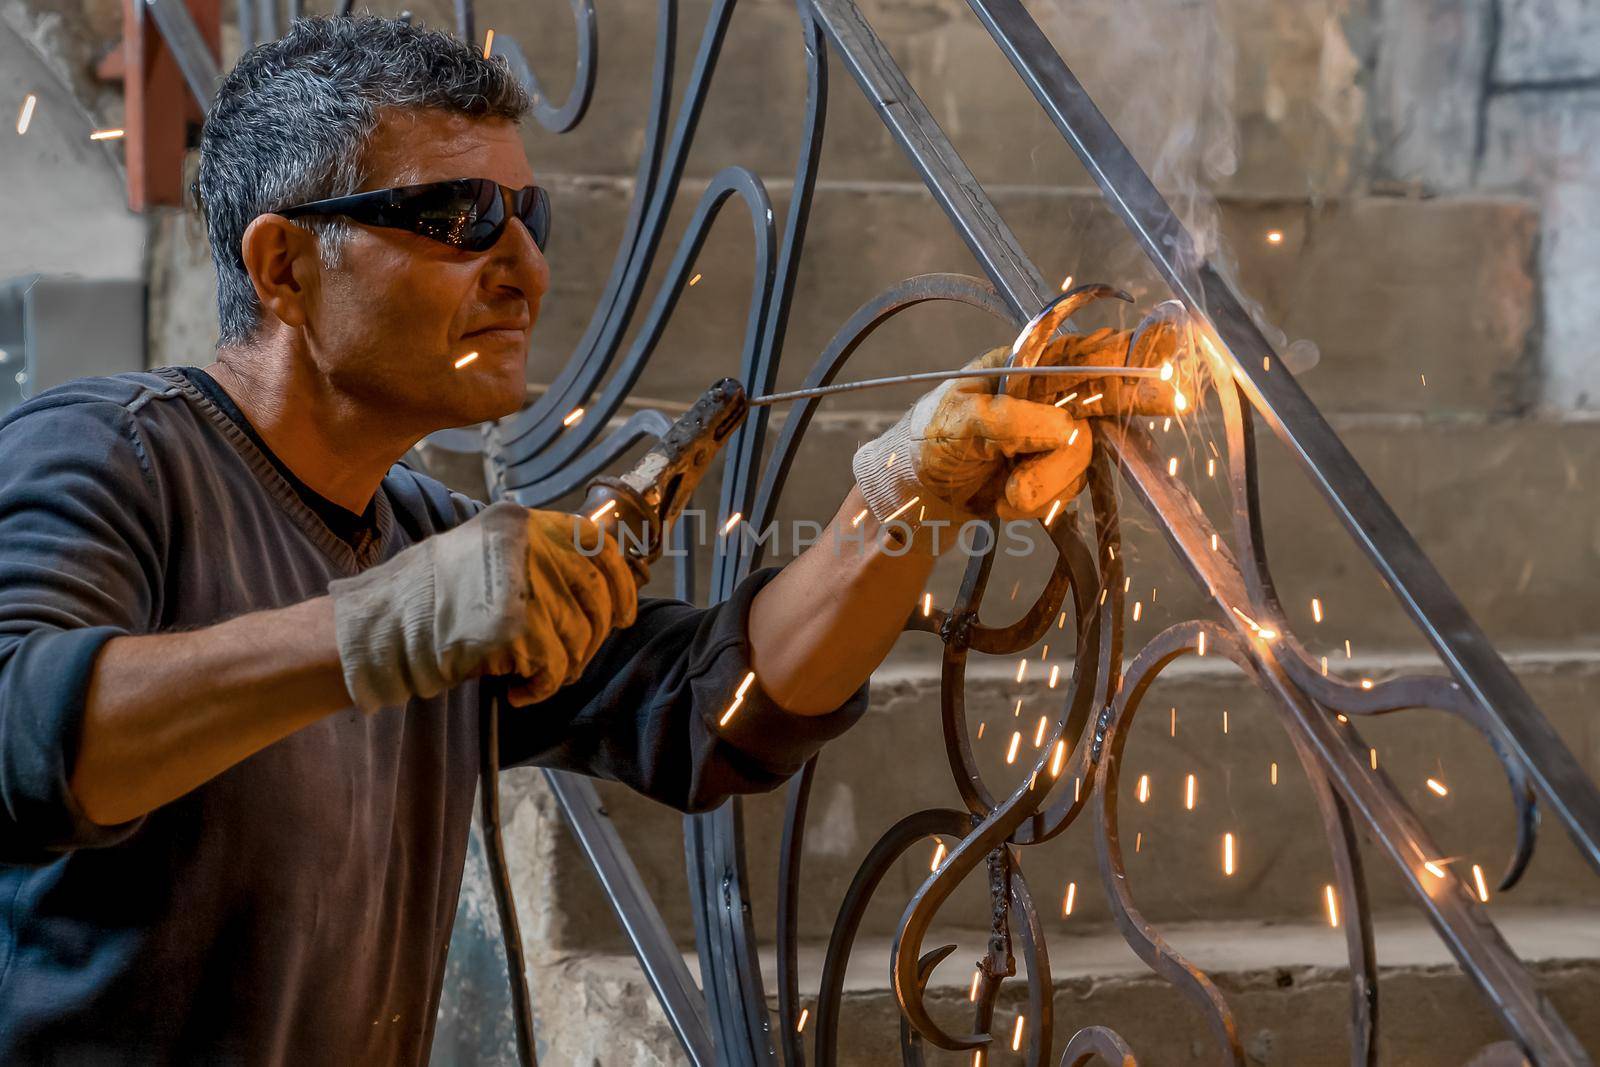 Man wearing protective glasses welds metal with welding machine in a private house. Interior welding work. Close-up.